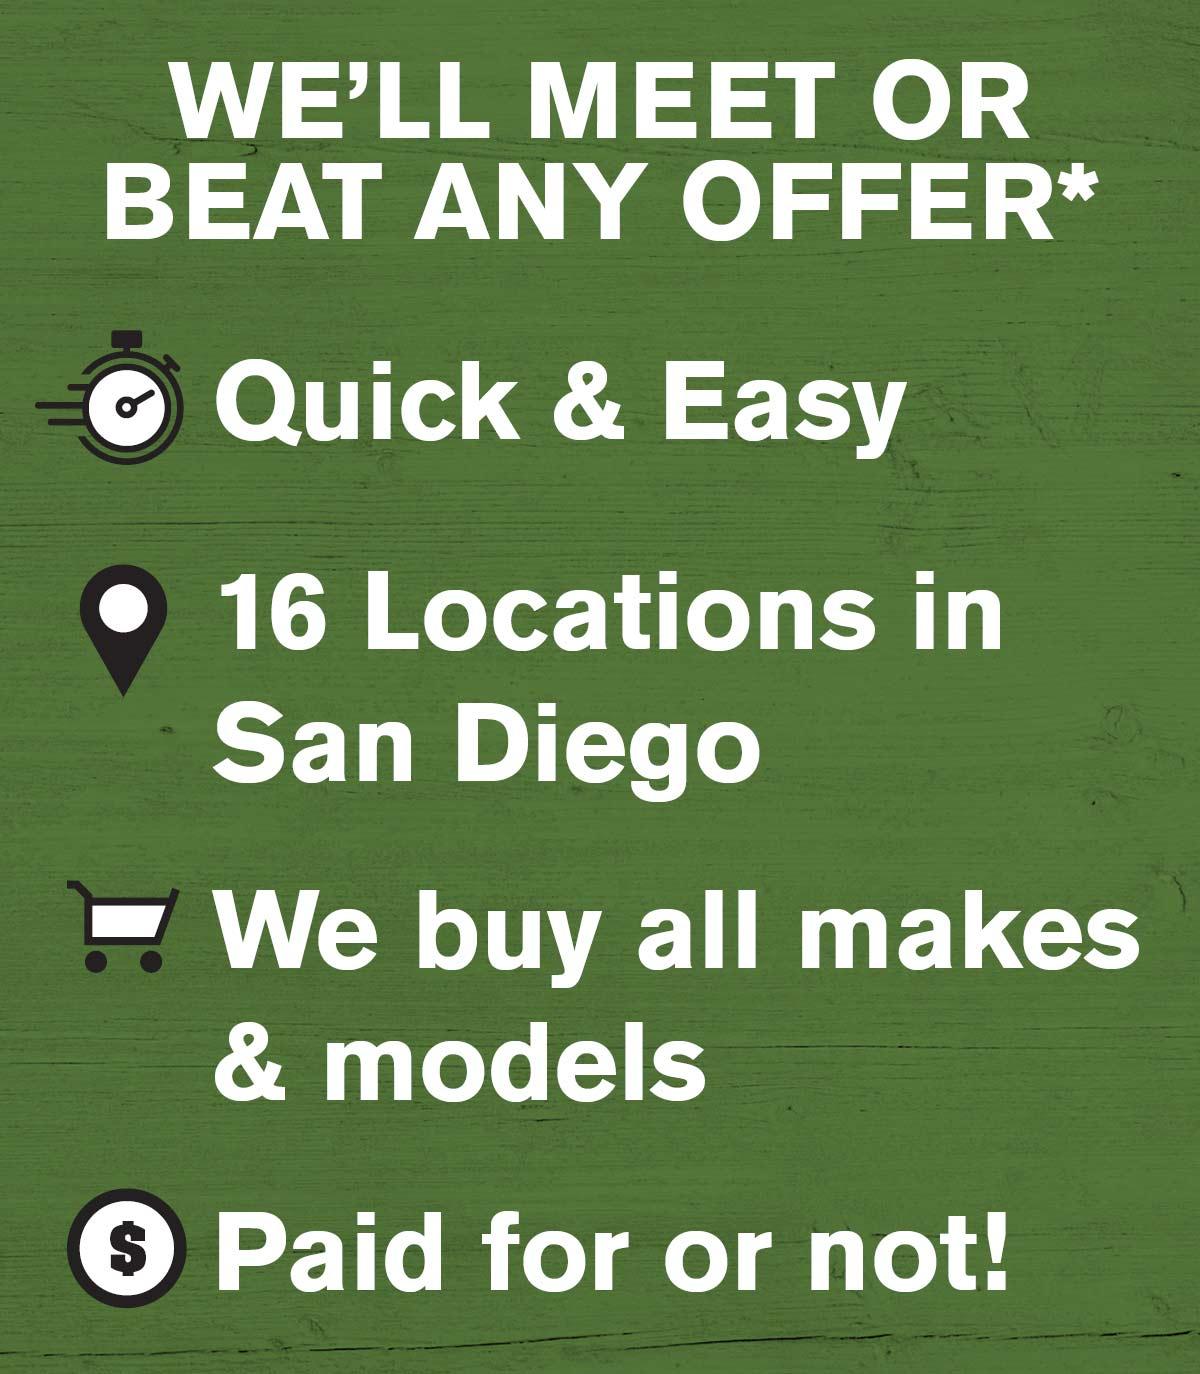 Mossy Auto Group will beat any other offer you receive for your car.